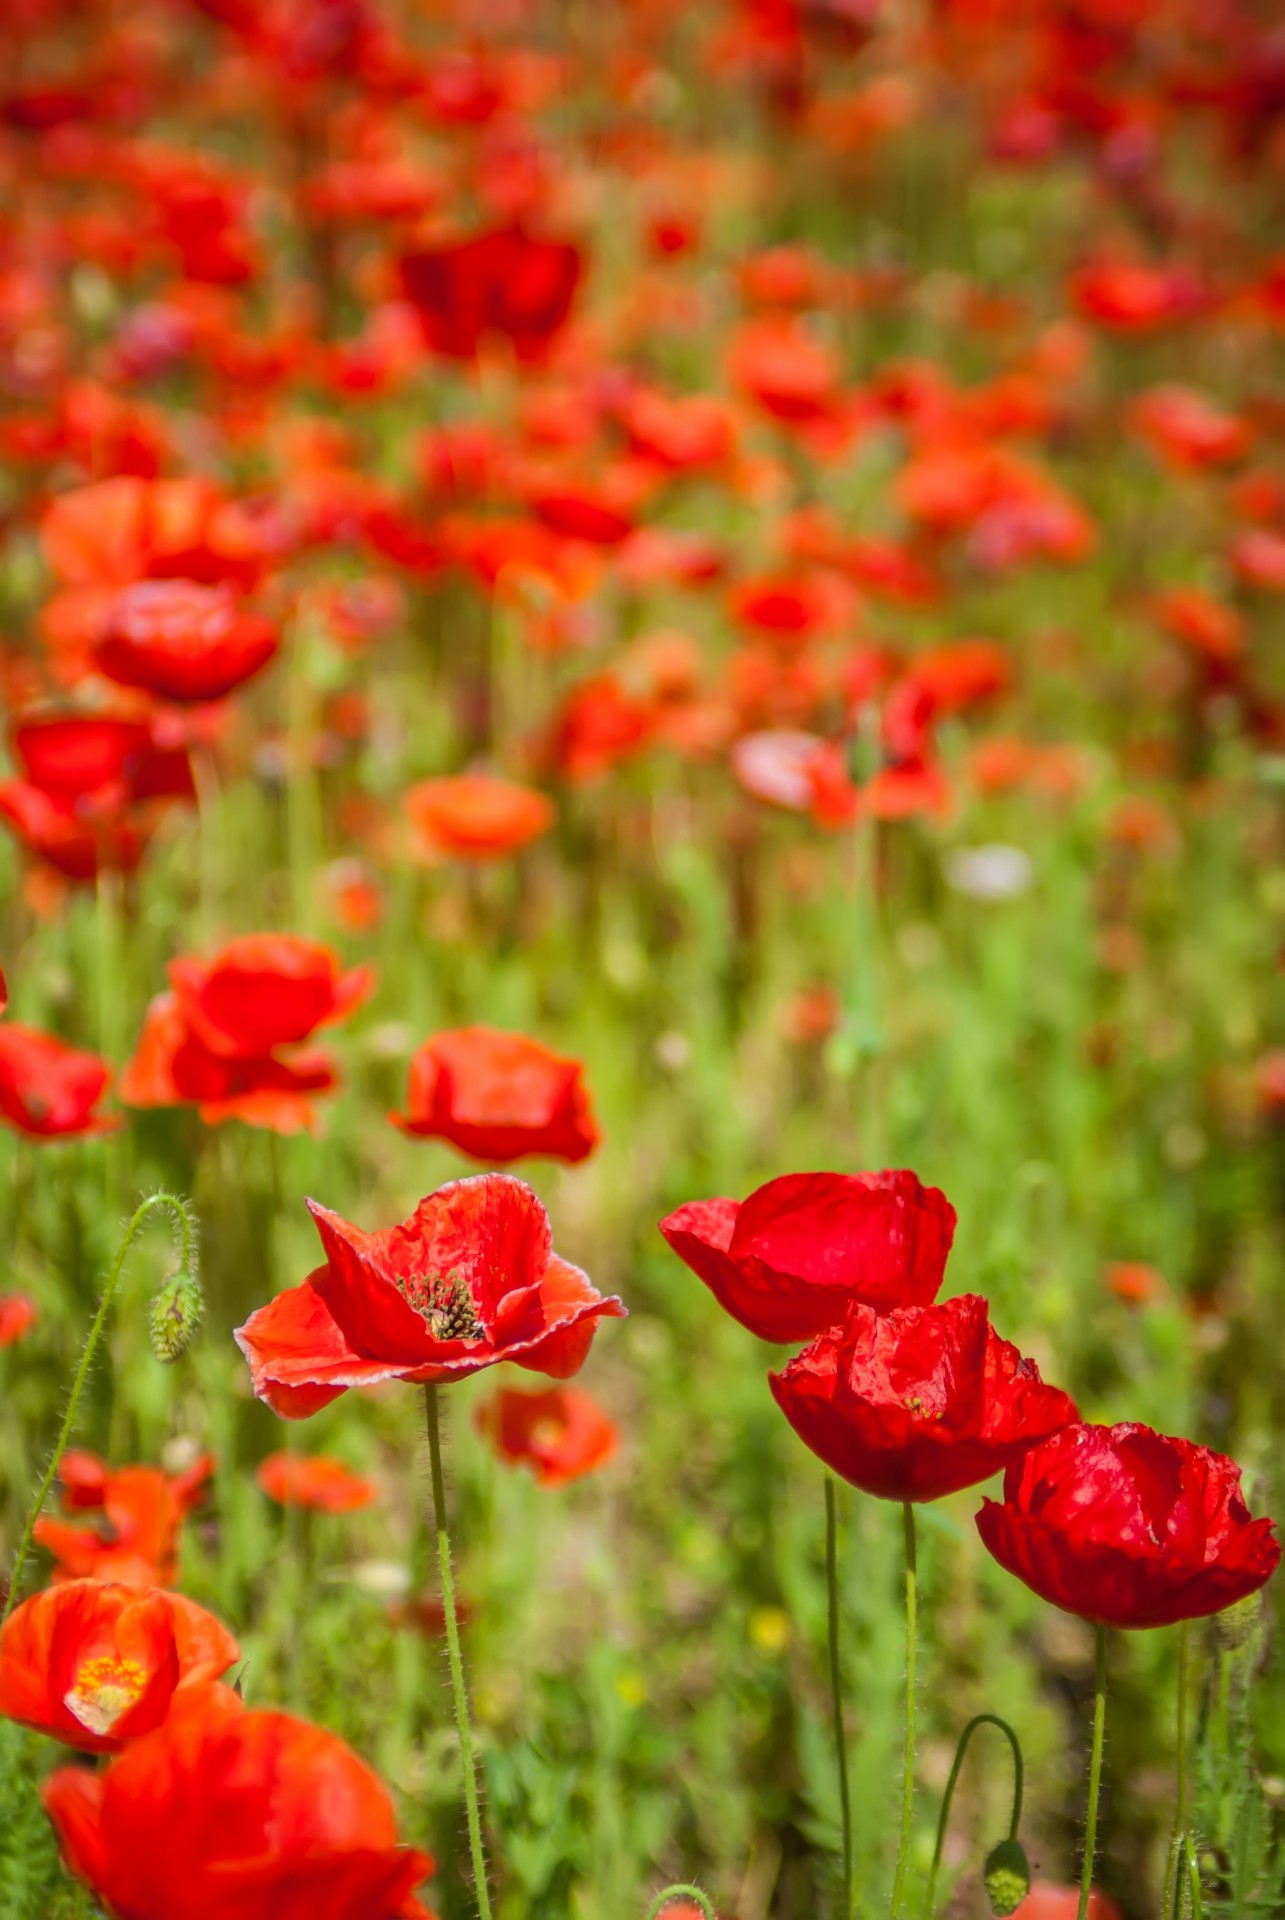 Poppies Flowers Wallpapers | HD Wallpapers | ID #11743